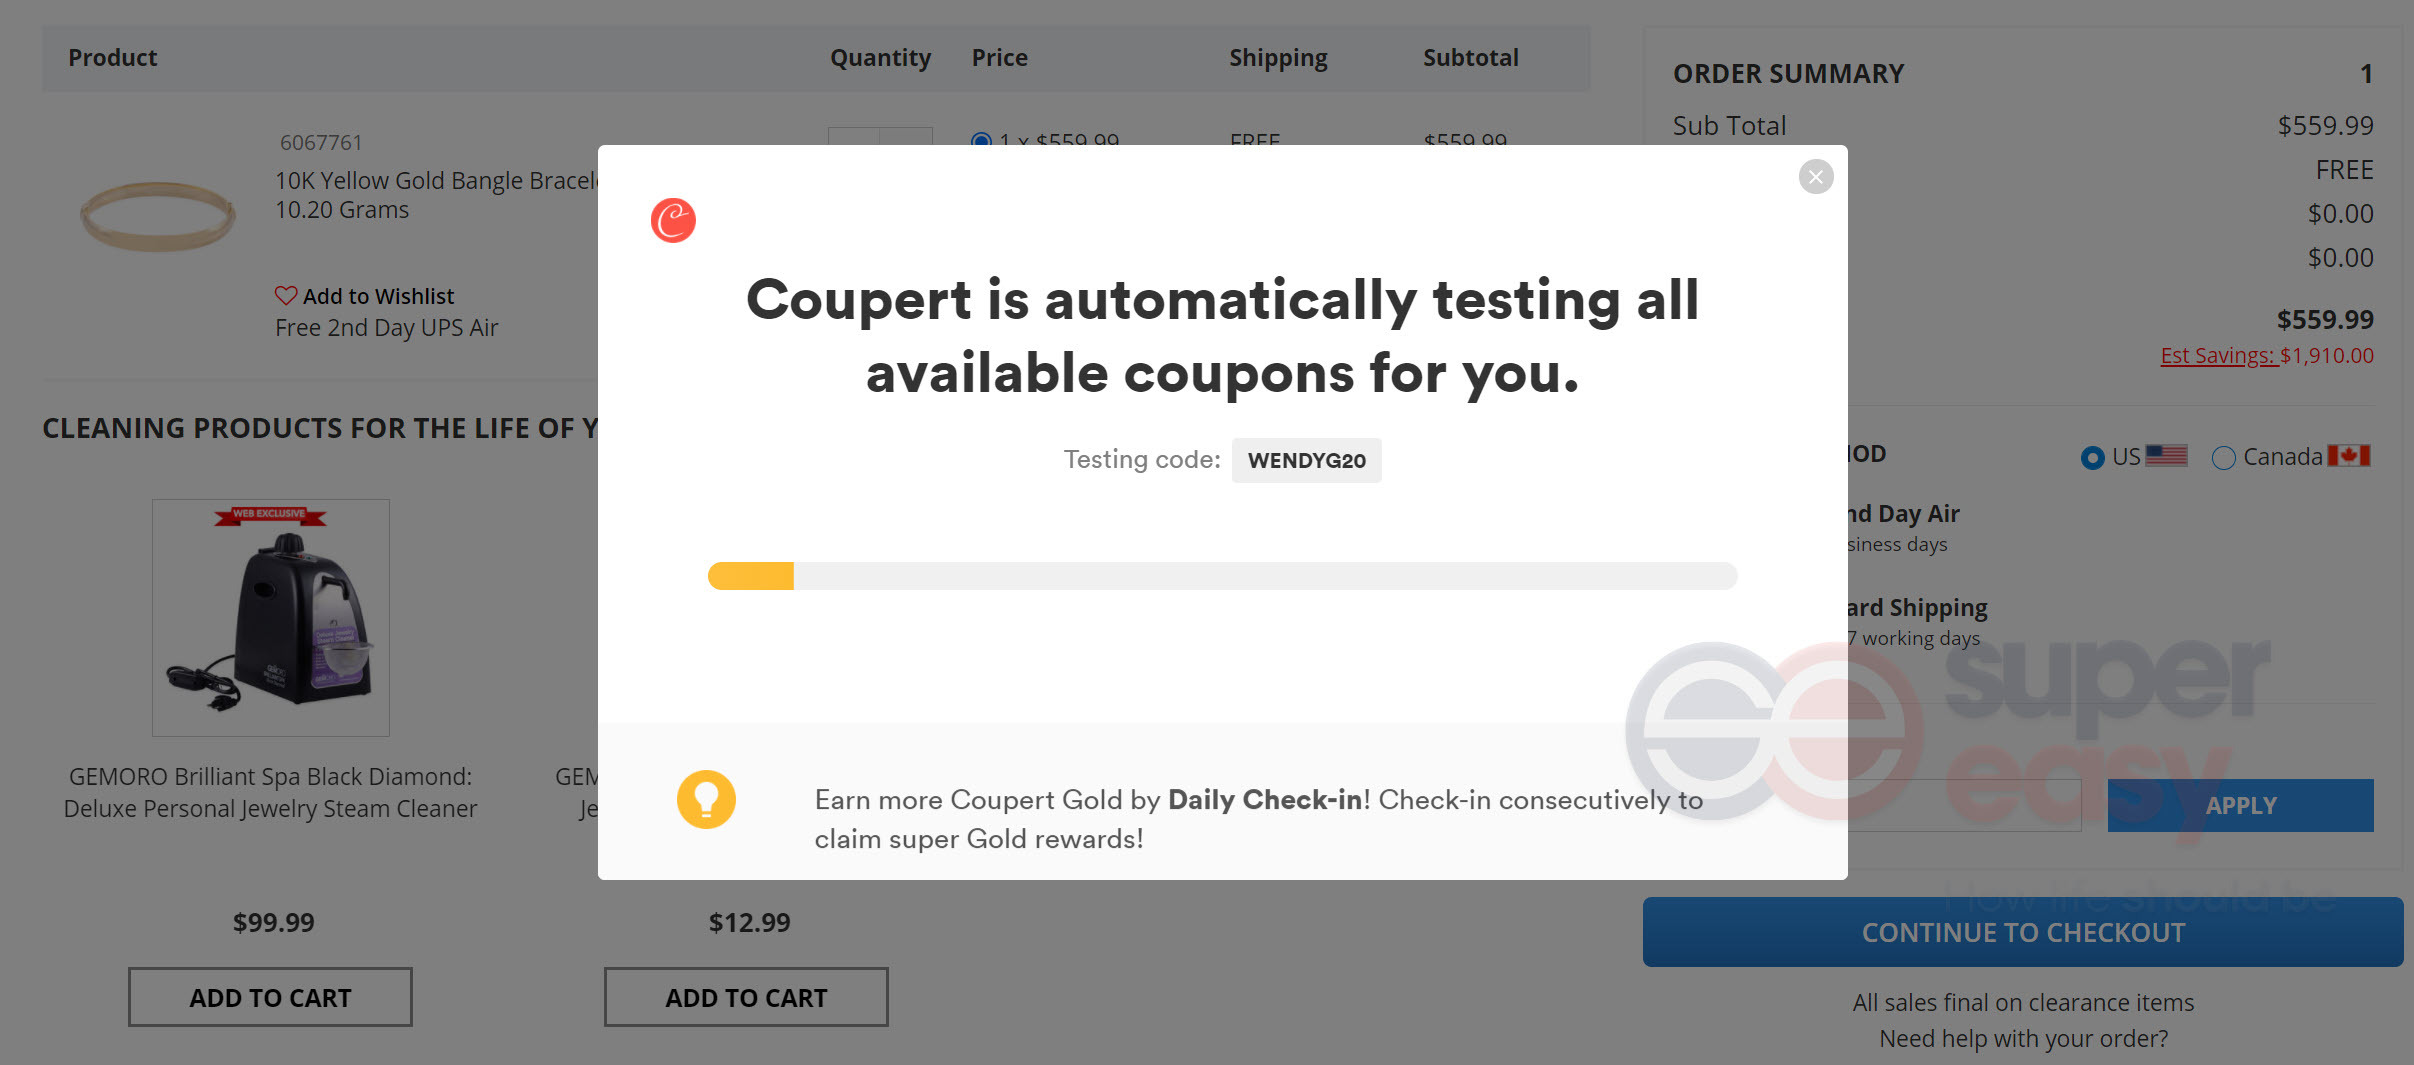 Coupert is automatically testing Shop LC coupons